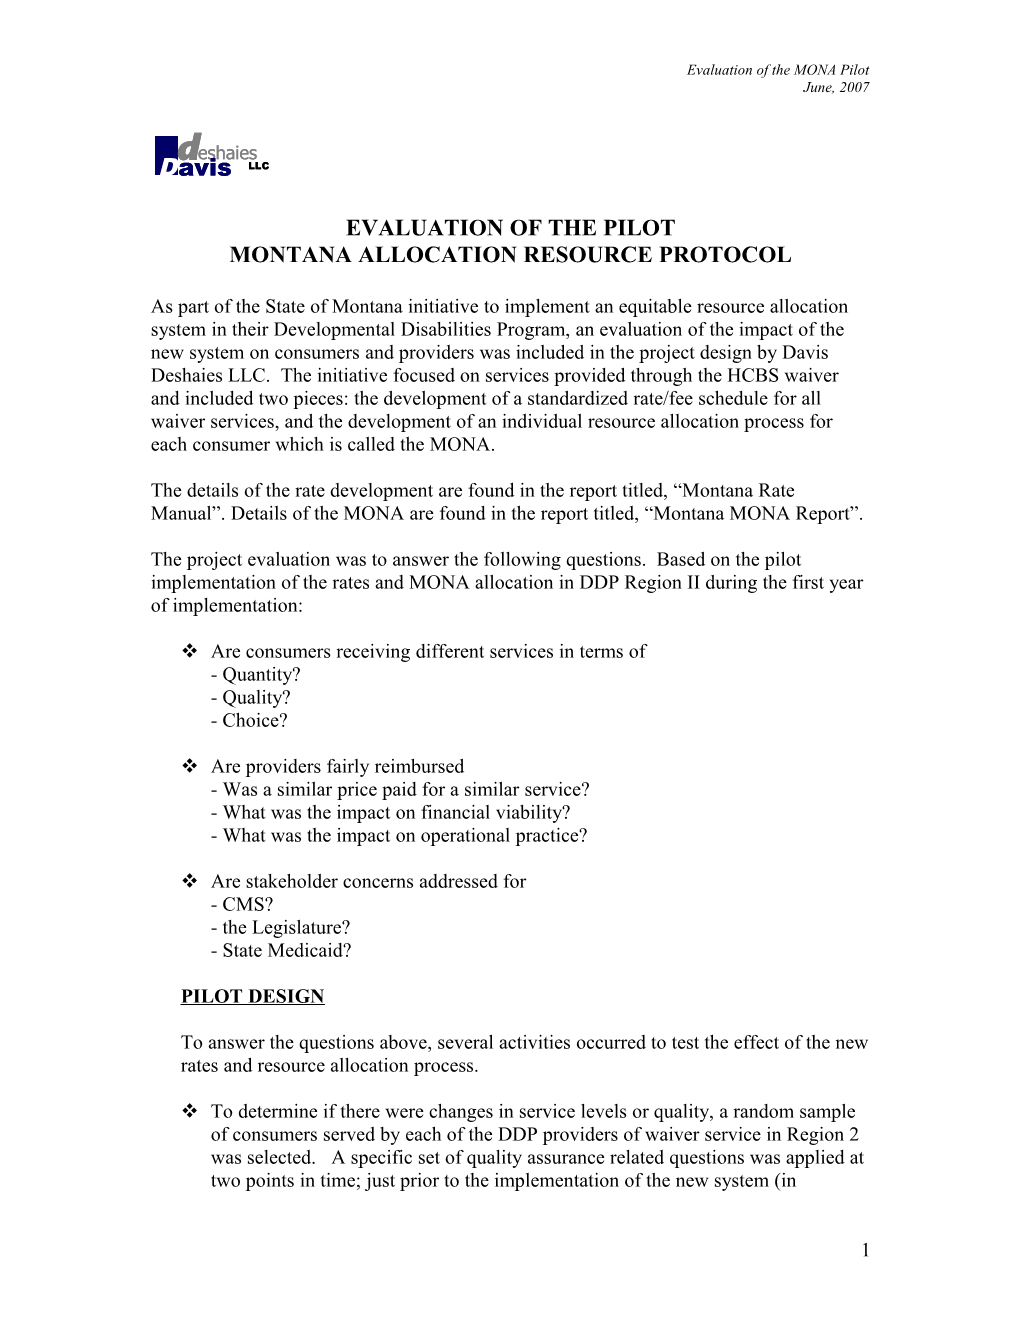 Evaluation of the Pilot